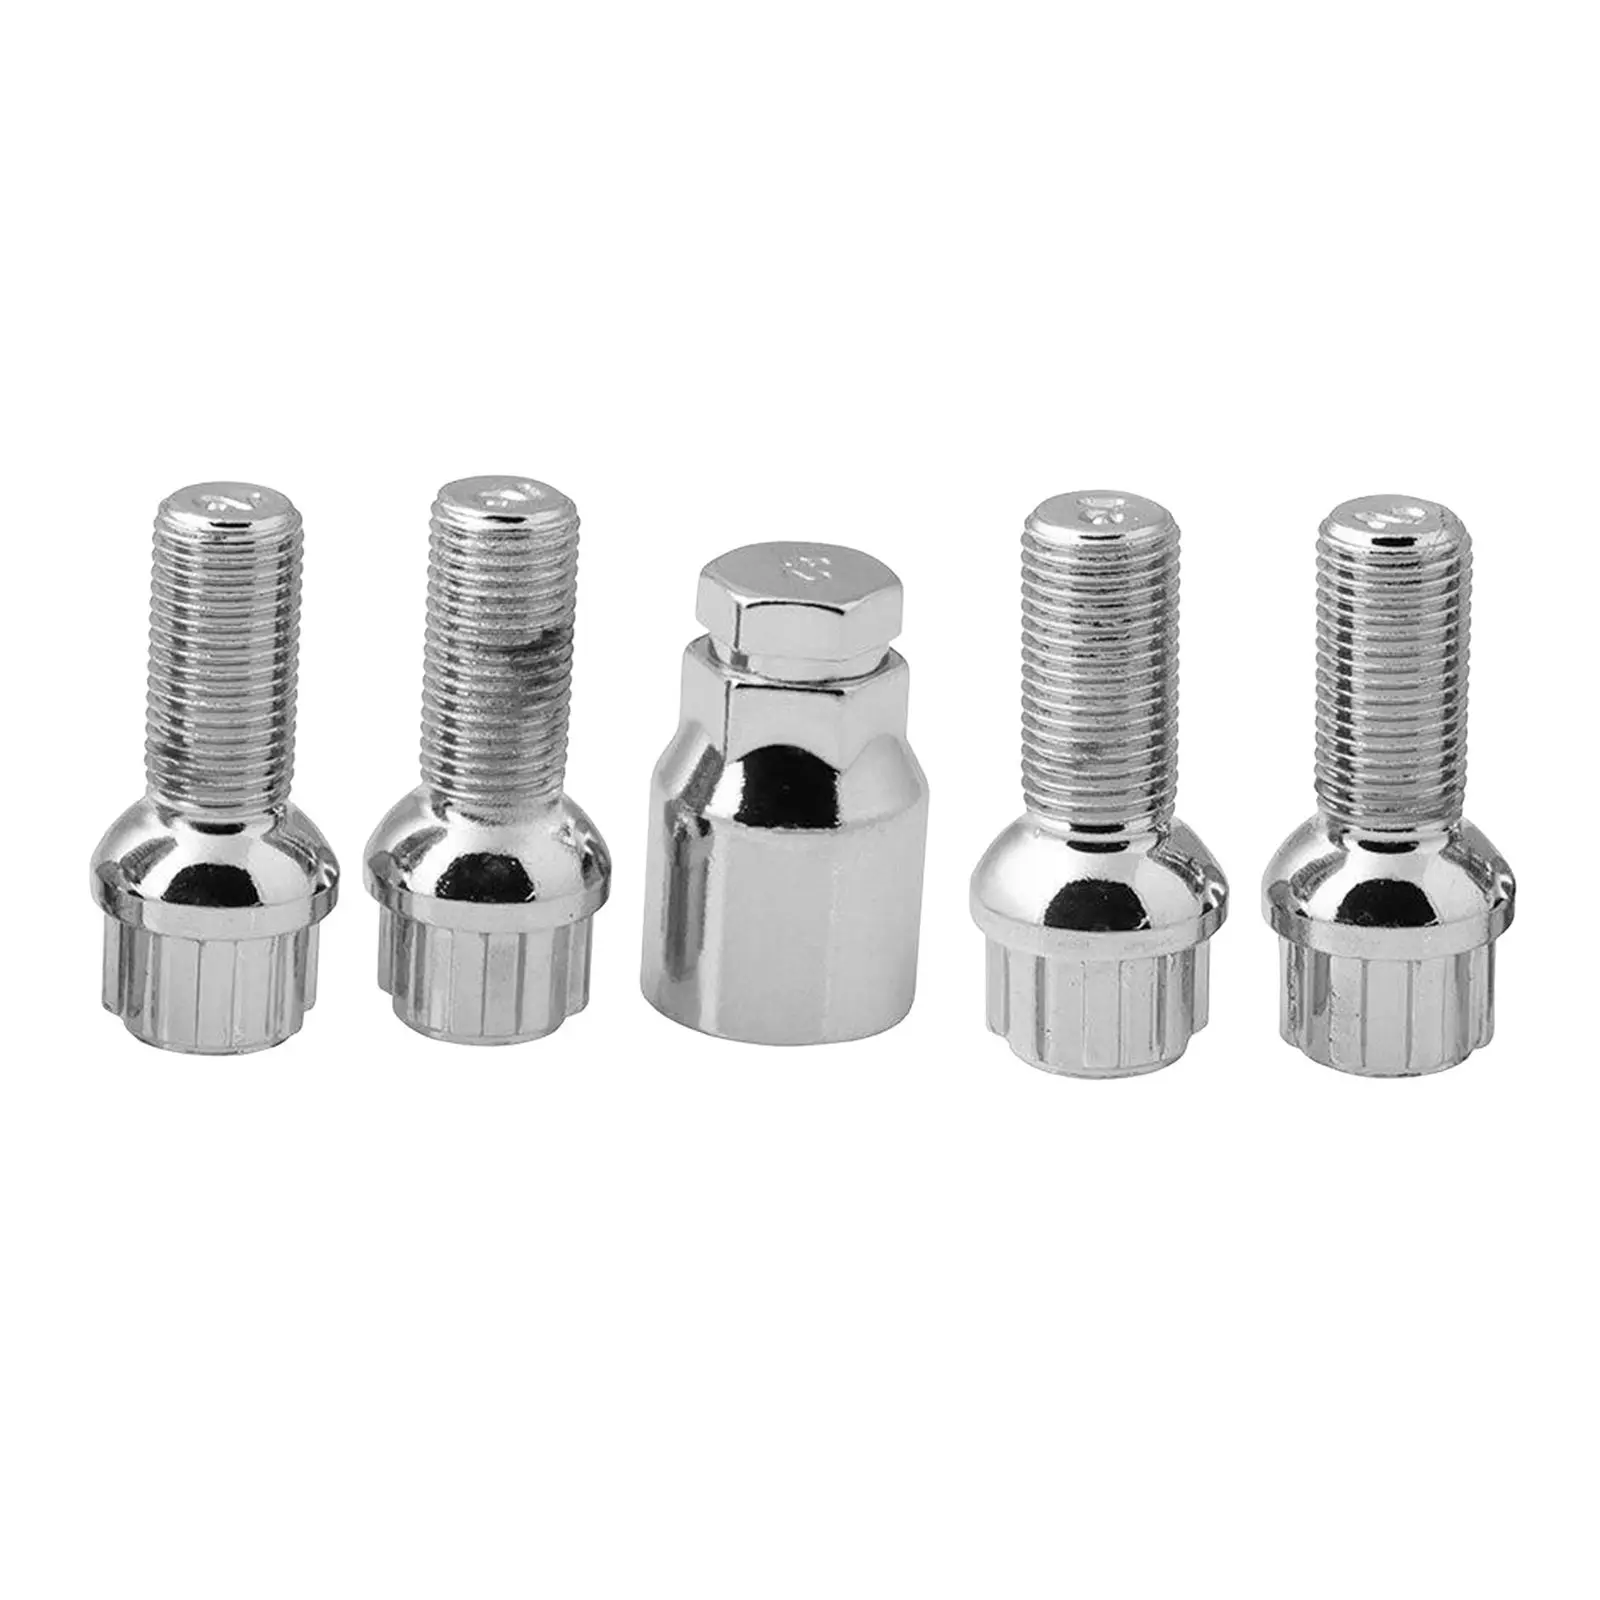 5pcs Iron Wheel Locking Bolt Fit for VW GOLF M14x1.5  Security Nuts, High Performance